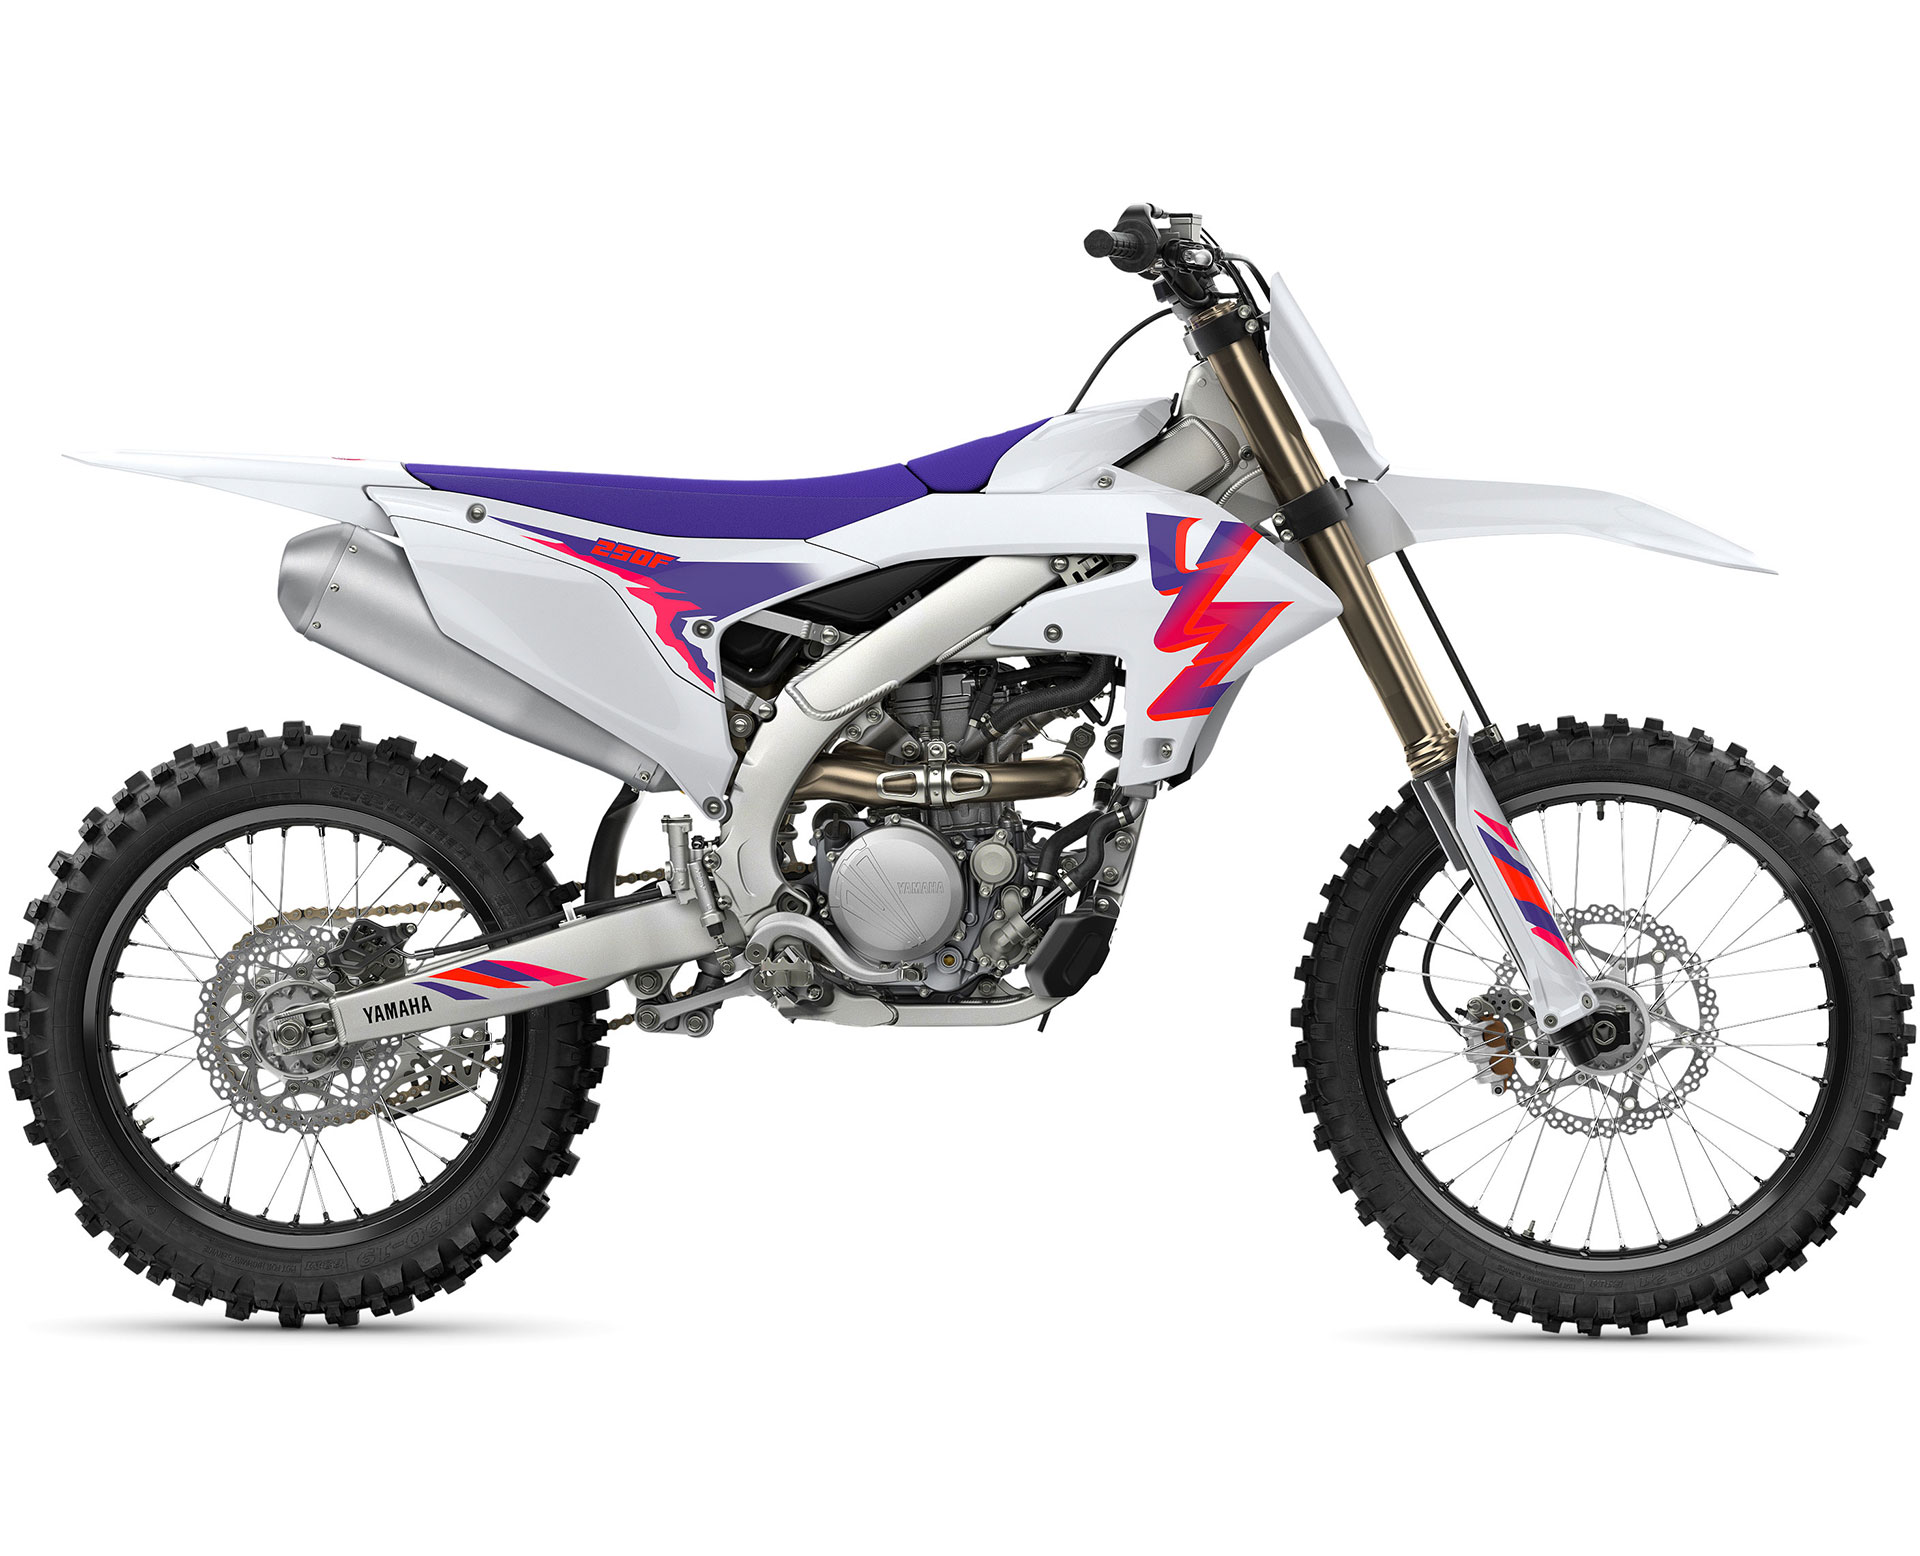 Thumbnail of your customized YZ250F 2024